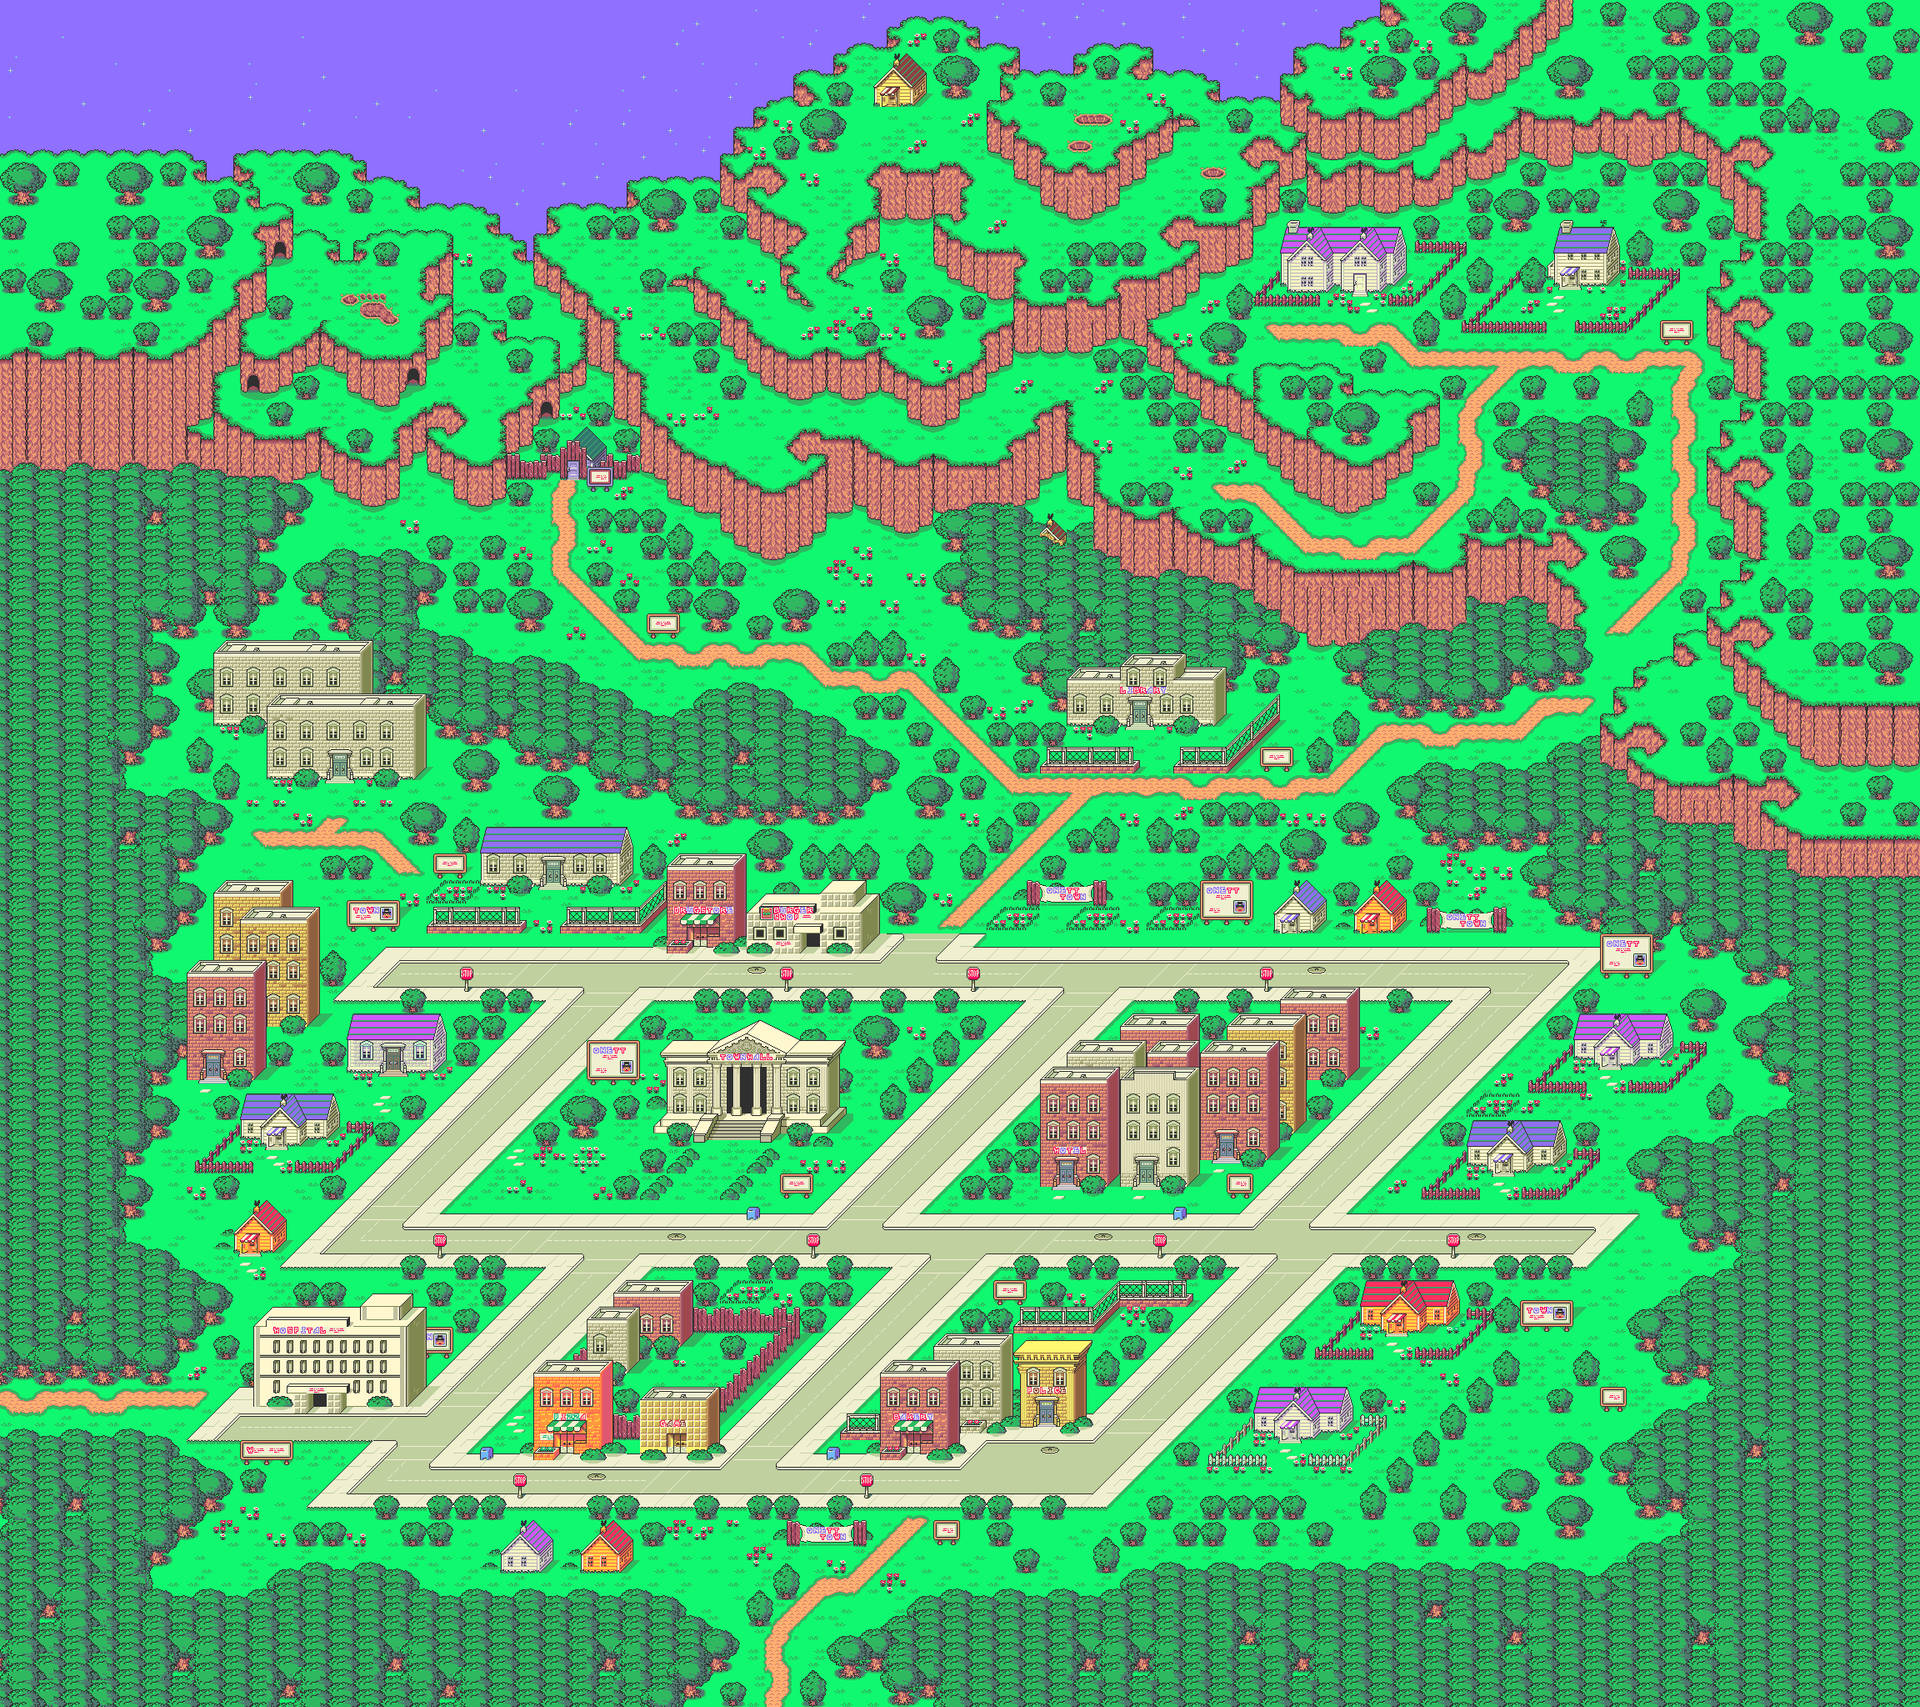 Explore the Beautiful City and Villages of Earthbound Wallpaper